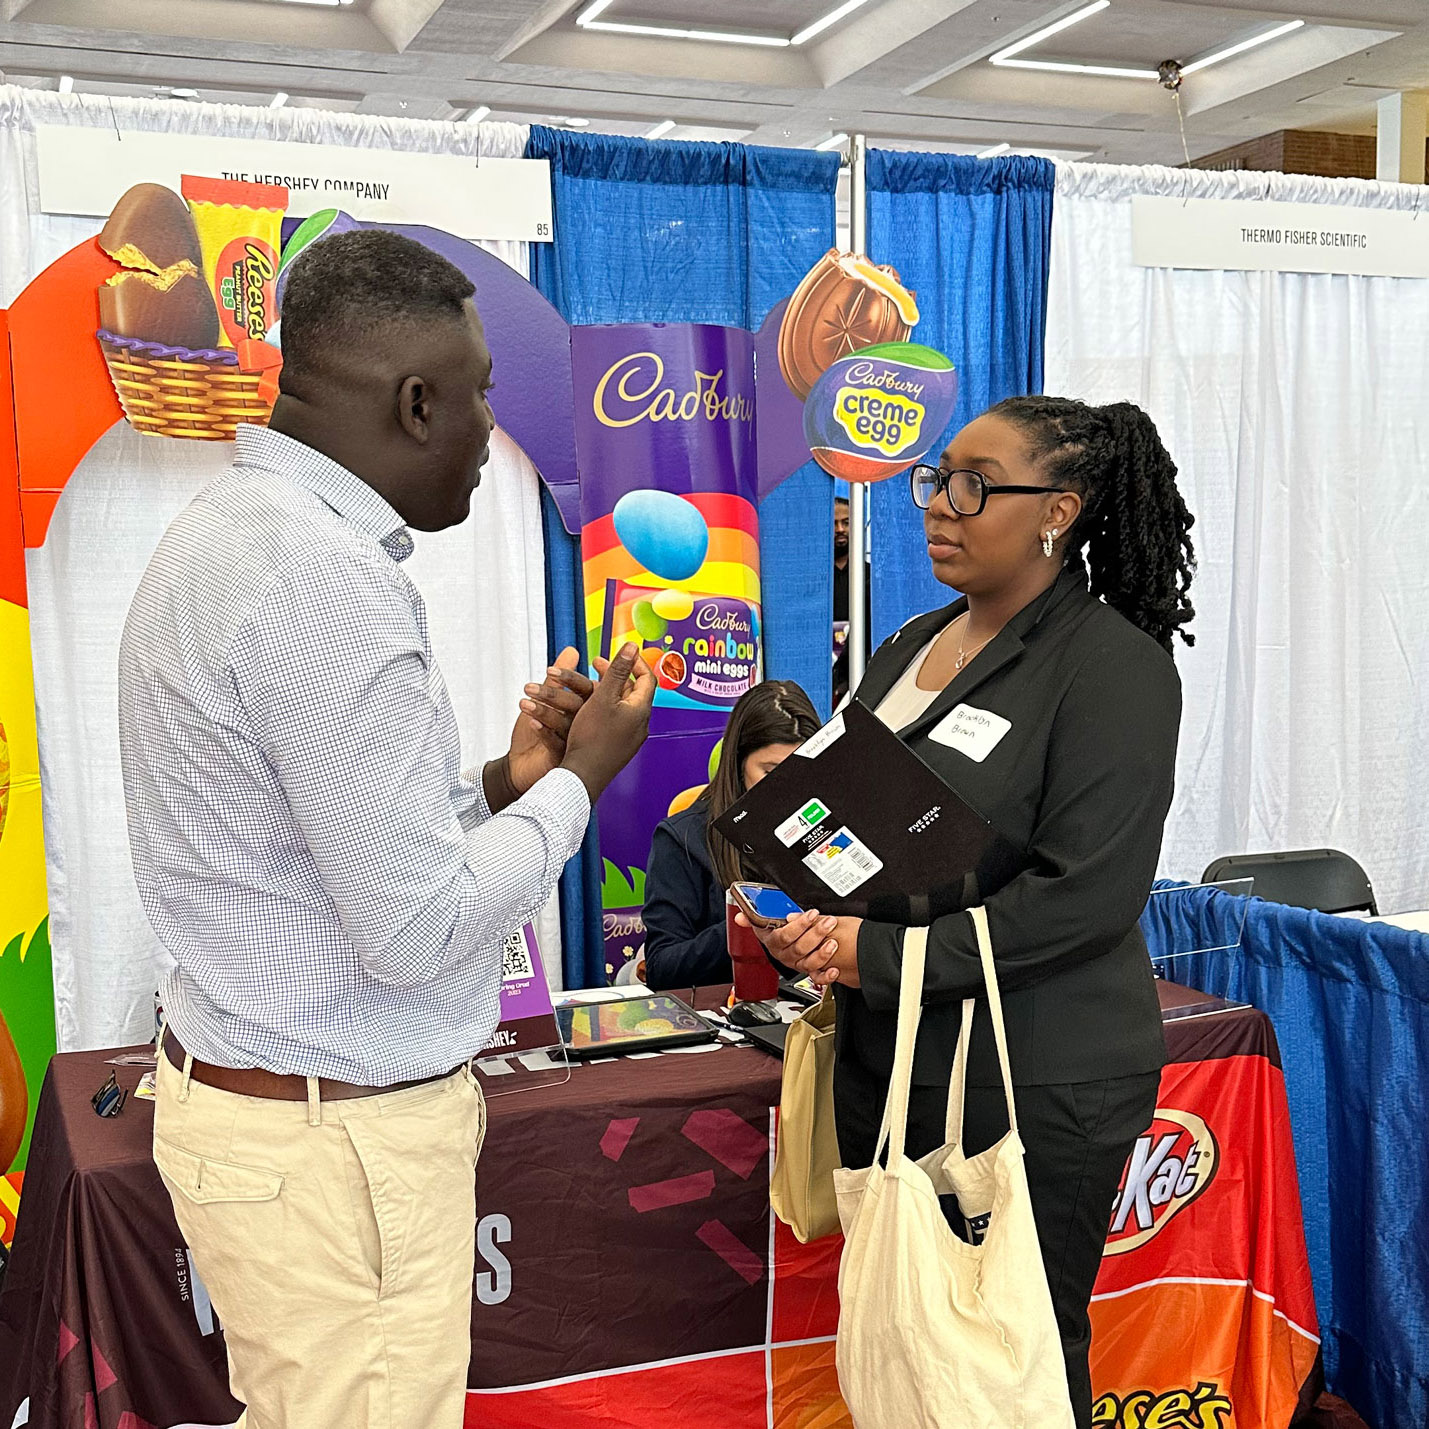 Two people speaking next to the Hershey Company booth at the career fair.